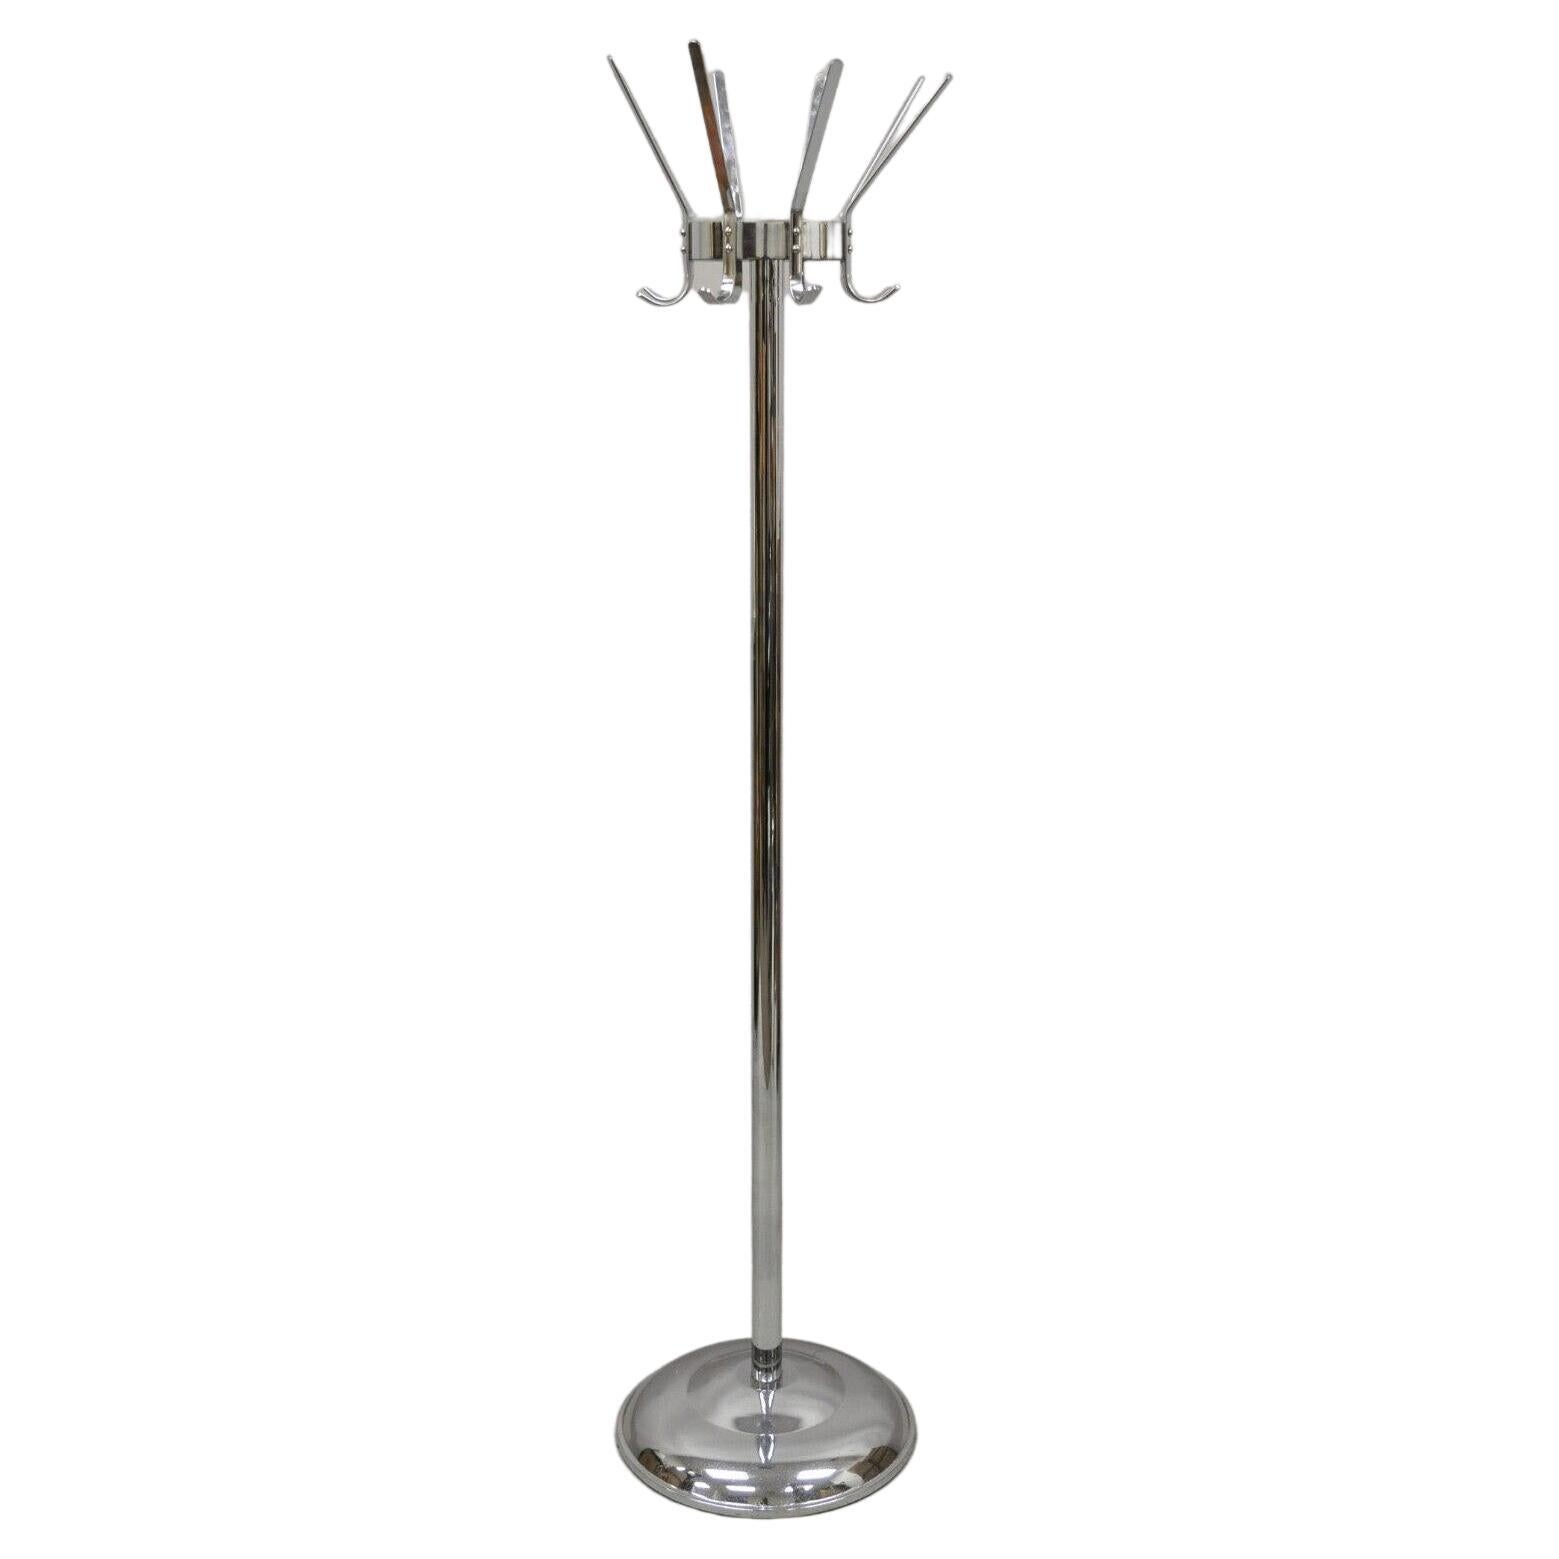 Vintage Chrome Metal Art Deco Style Coat Tree Stand with Revolving Hooks For Sale